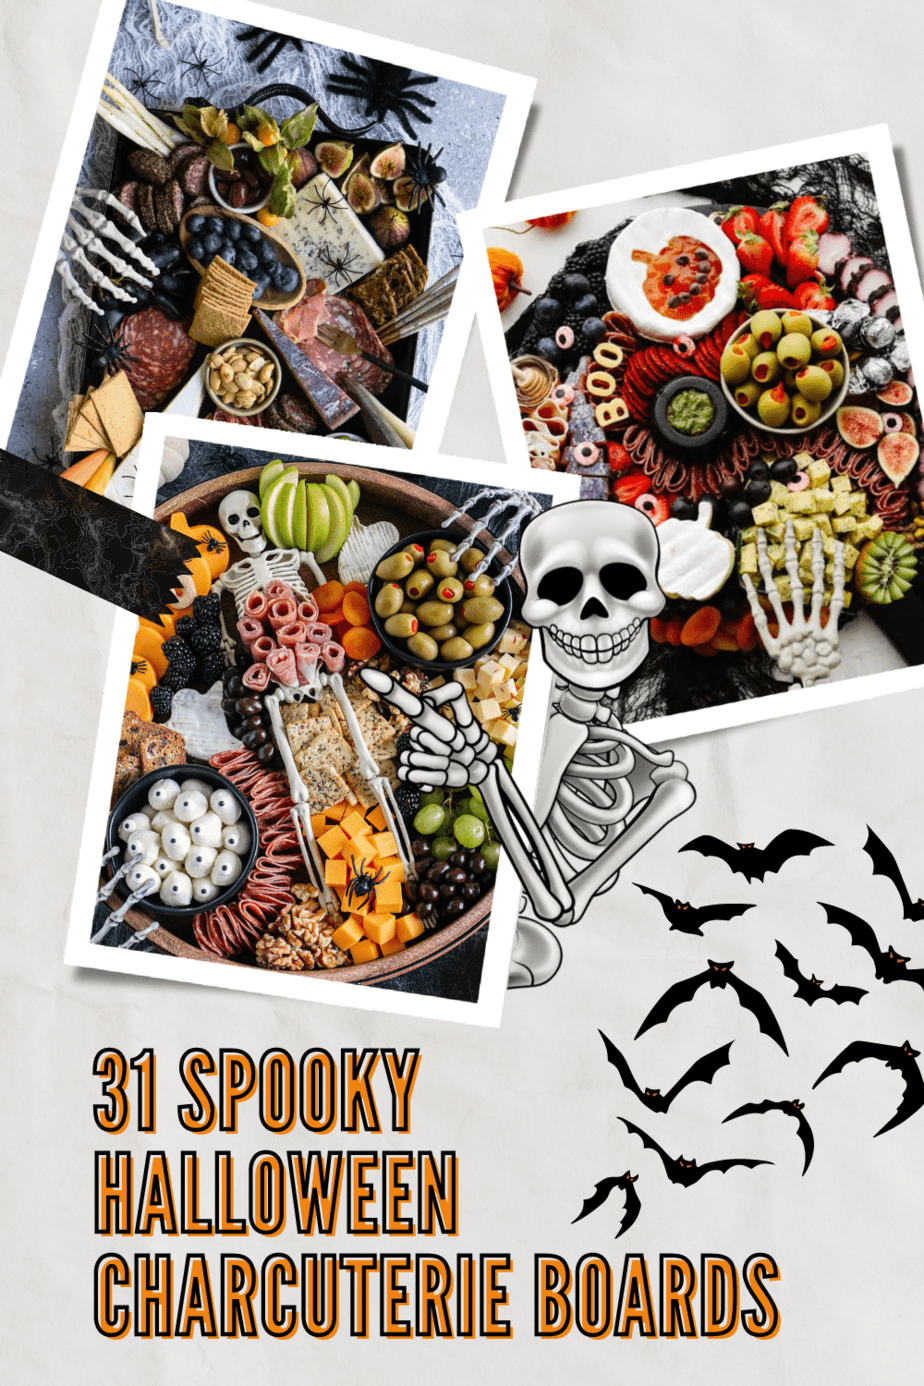 31 Easy Halloween Charcuterie Boards to Spook Your Party Guests!